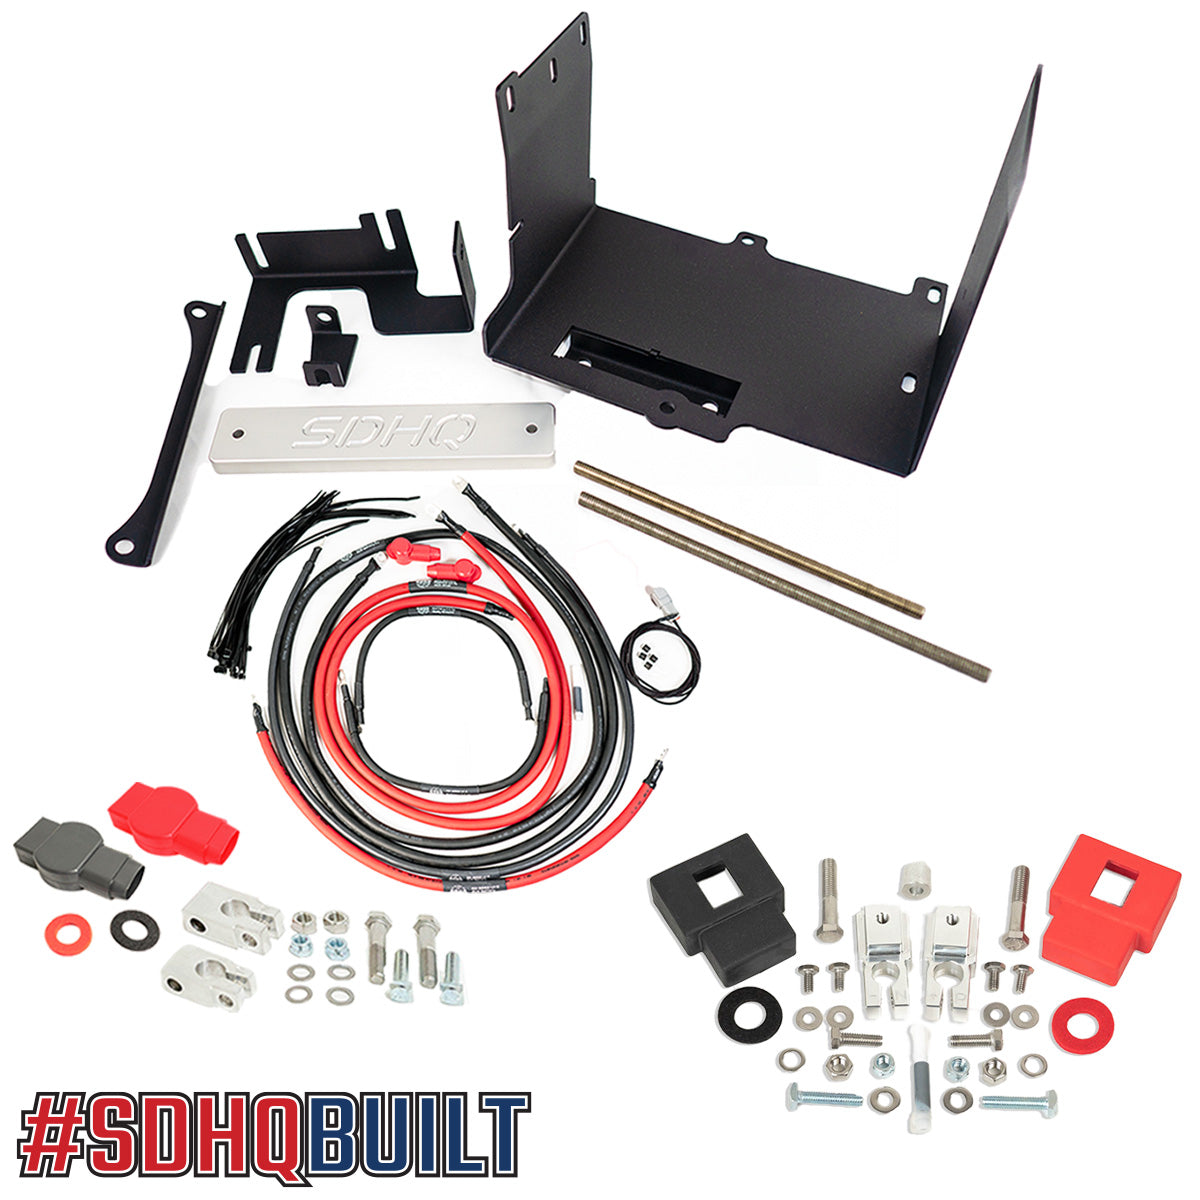 '10-Current Toyota 4Runner SDHQ Built "Build your Own" Dual Battery Kit